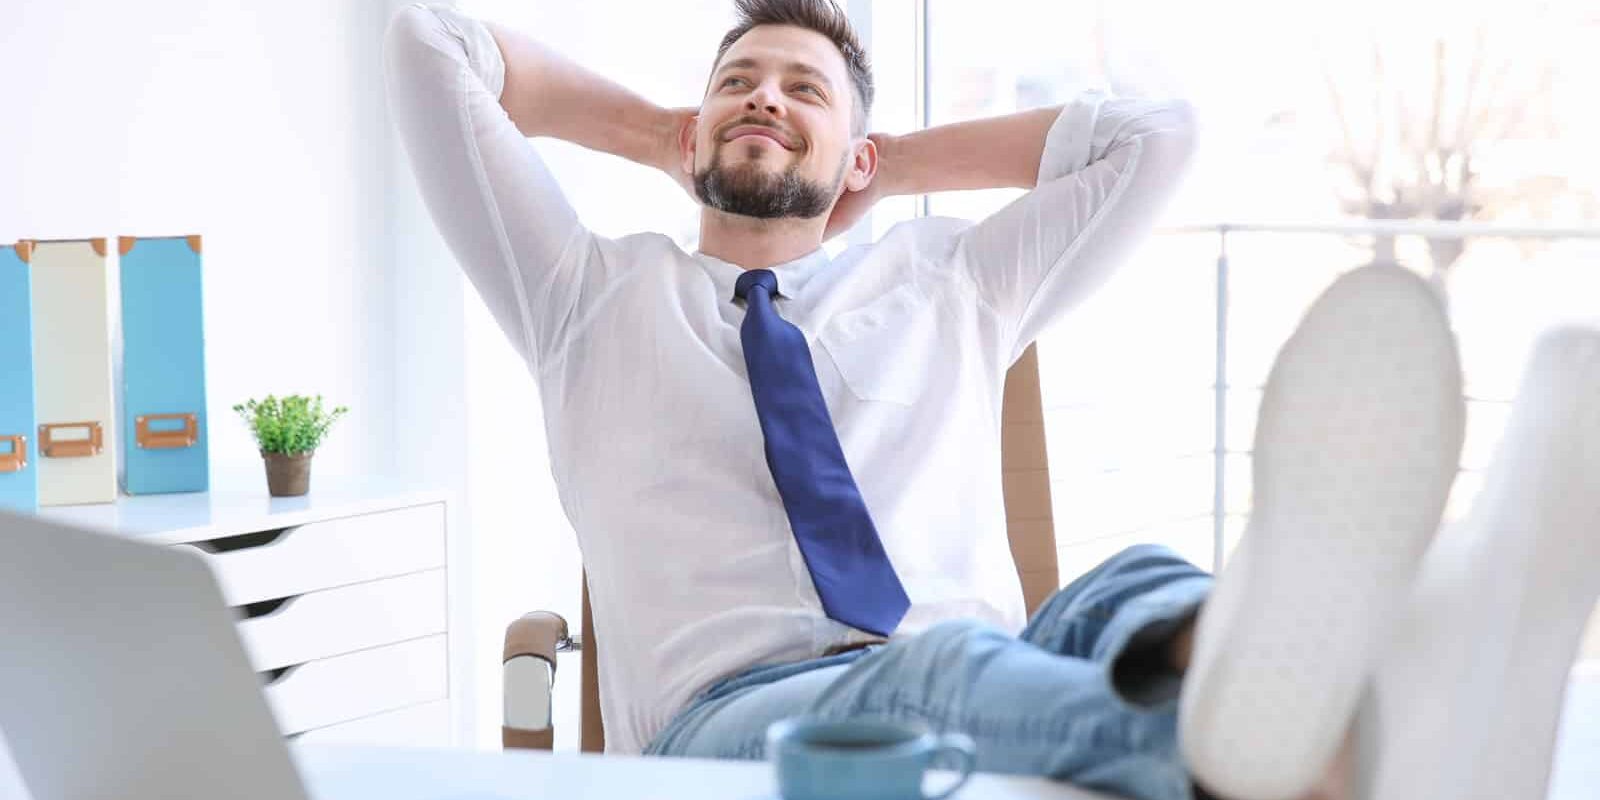 outsourced services man putting feet on desk